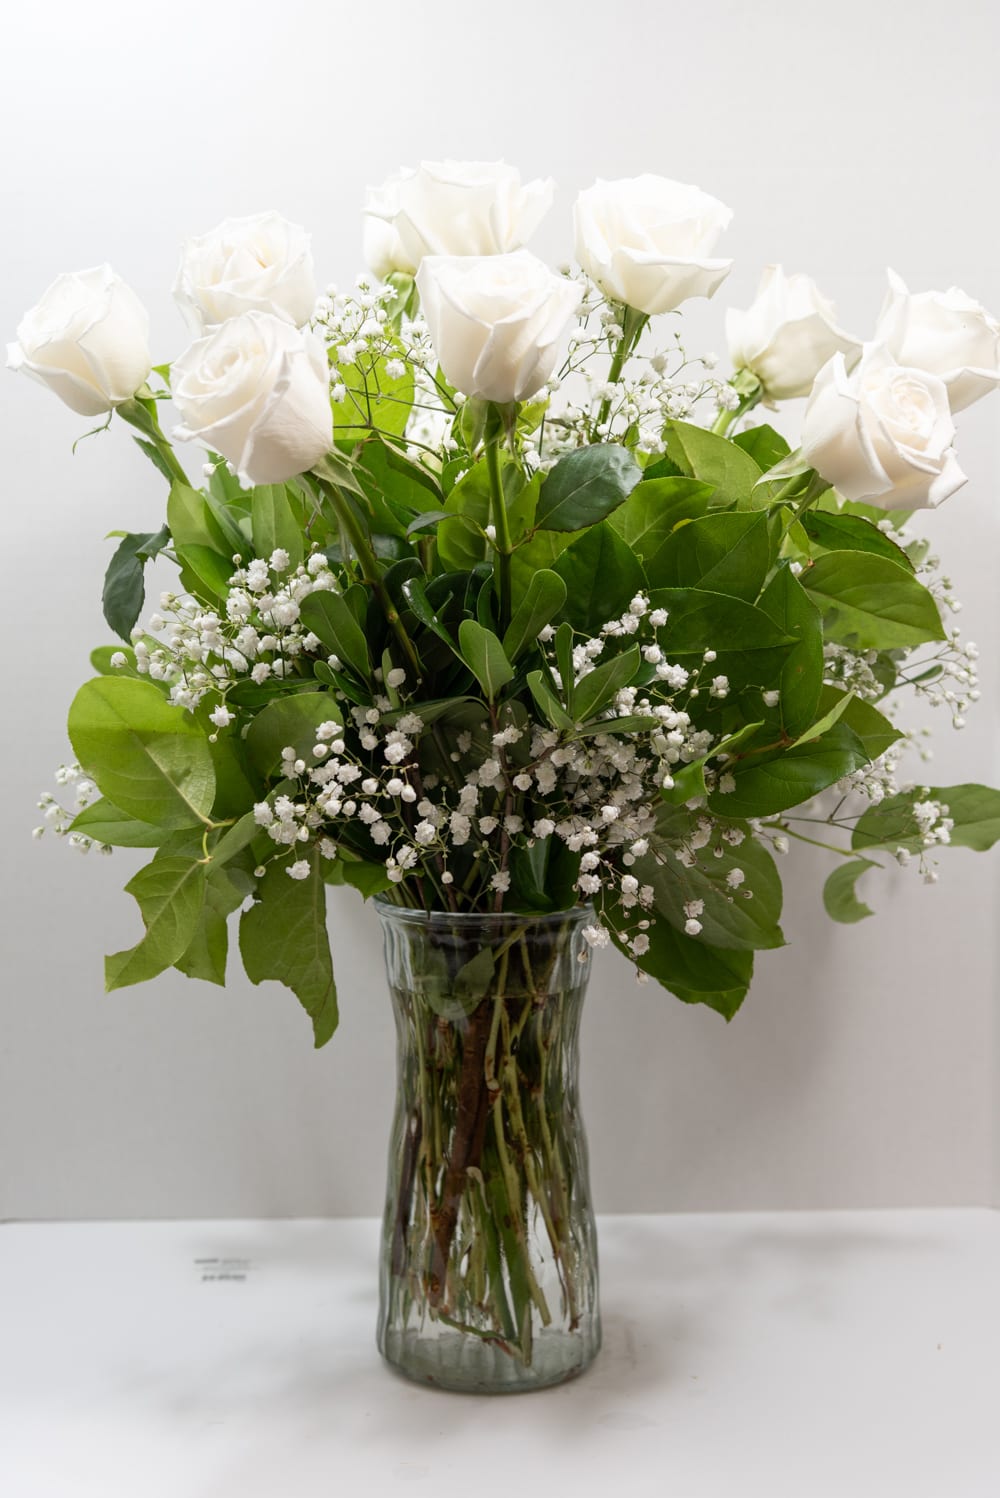 A graceful bouquet of white roses, framed by baby&#039;s-breath filler. The sophisticated